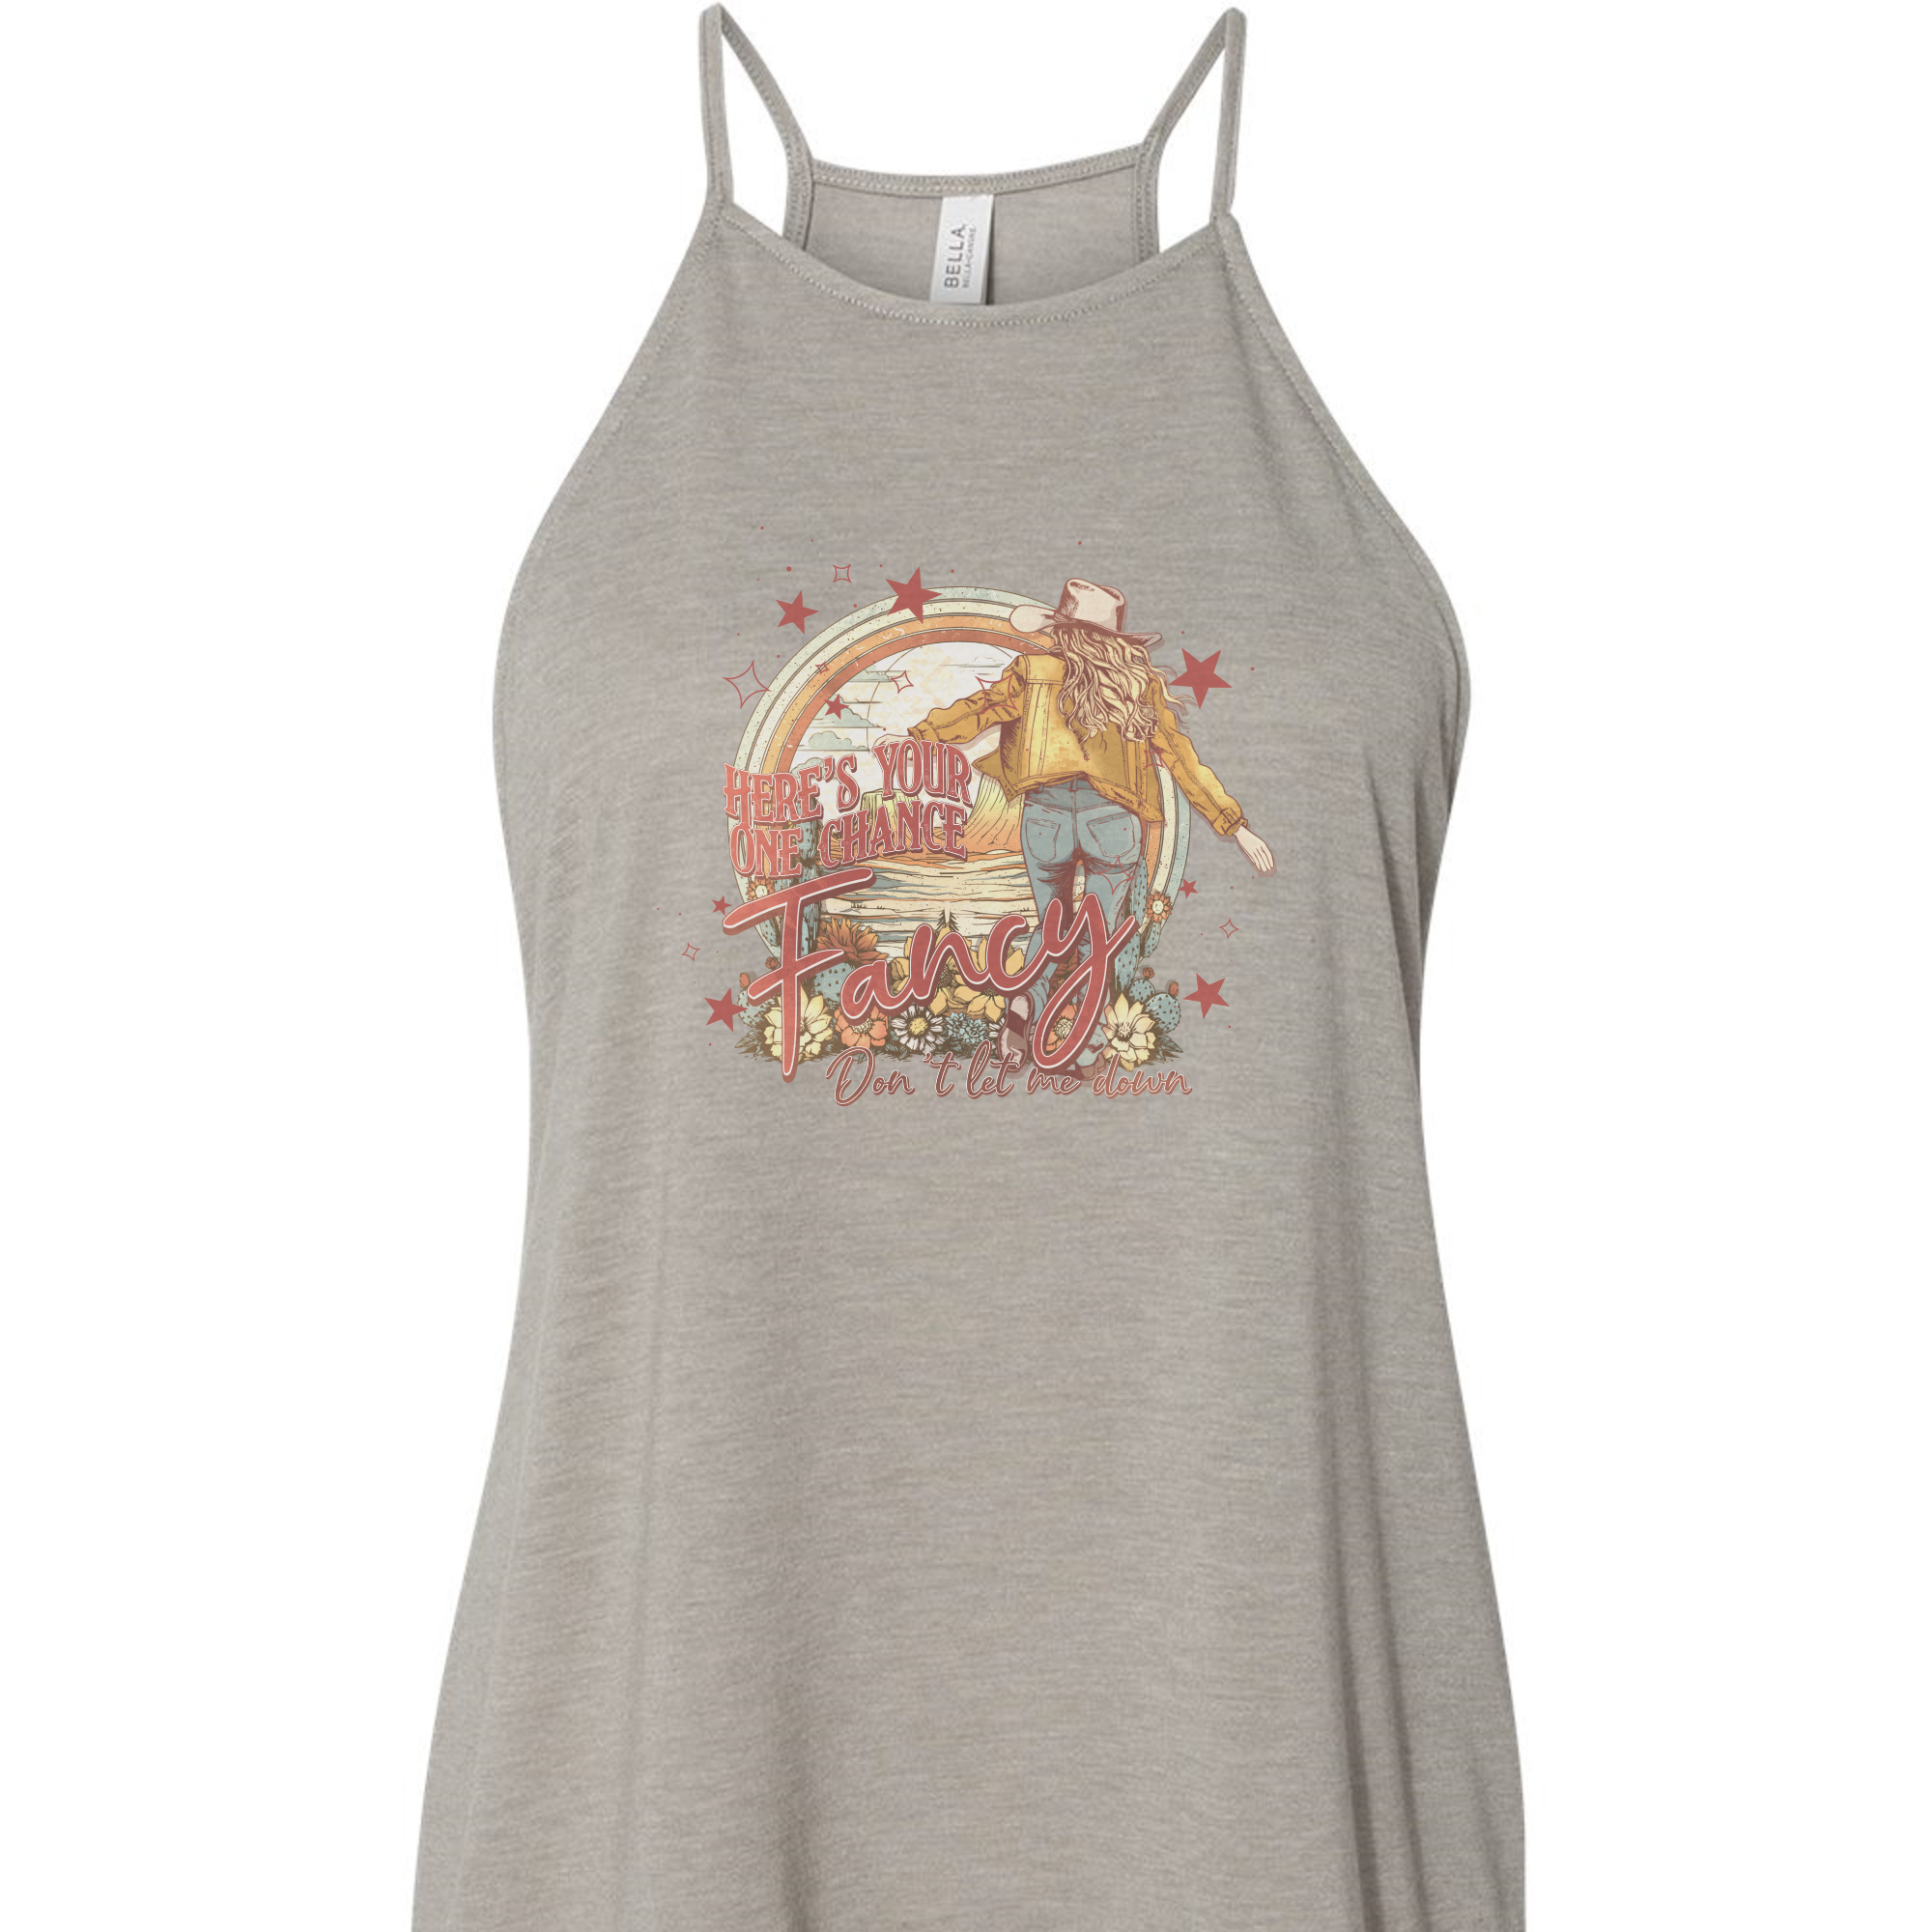 Here's Your One Chance Fancy Western Tank Top